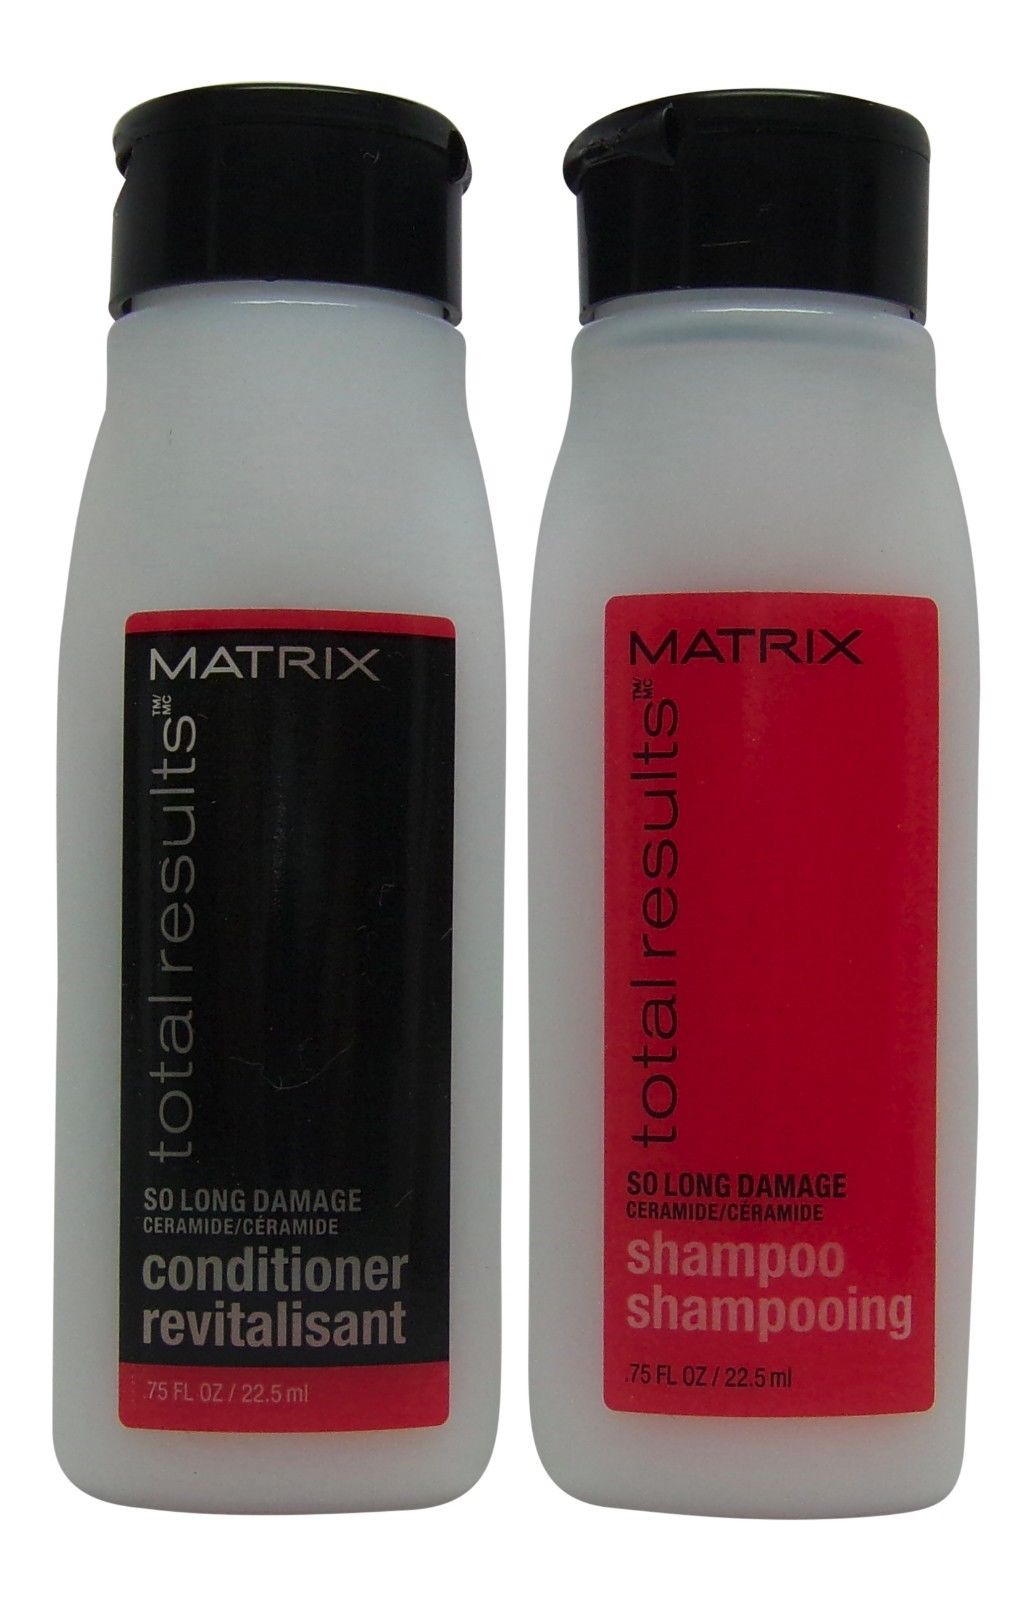 Matrix Total Results Shampoo & Conditioner Lot of 14 (7 of Each)